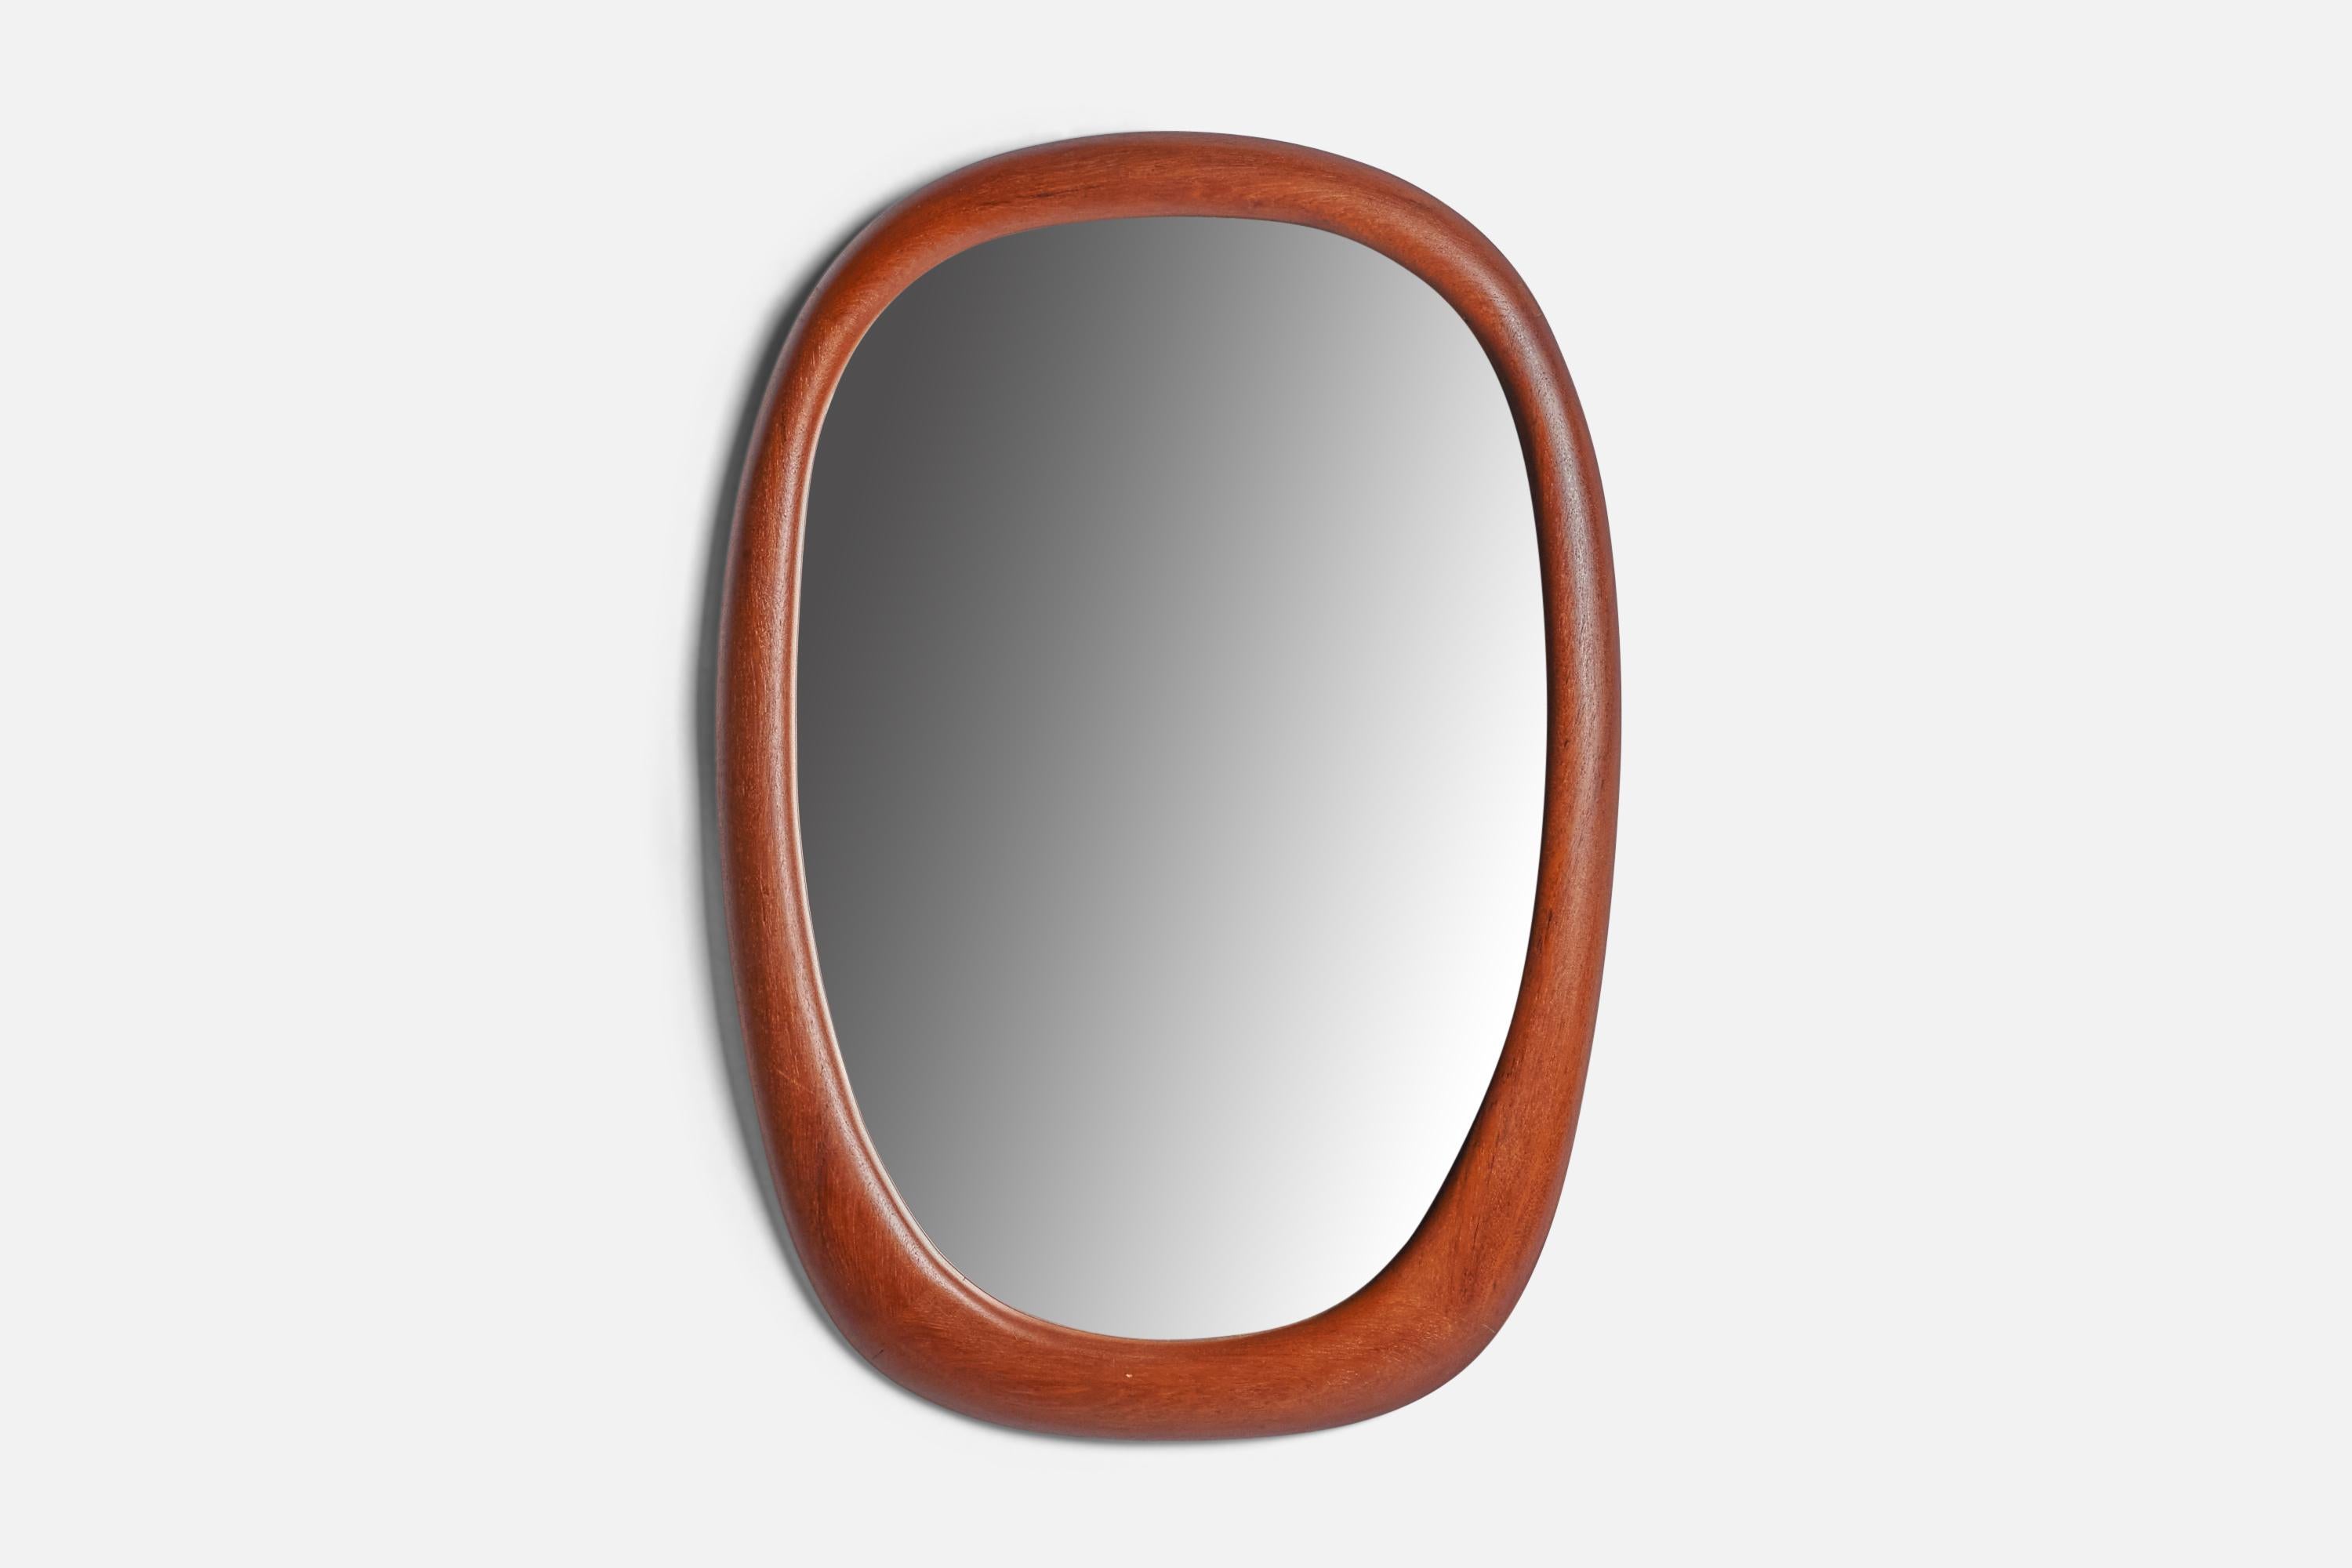 A teak wall mirror designed and produced in Sweden, 1950s